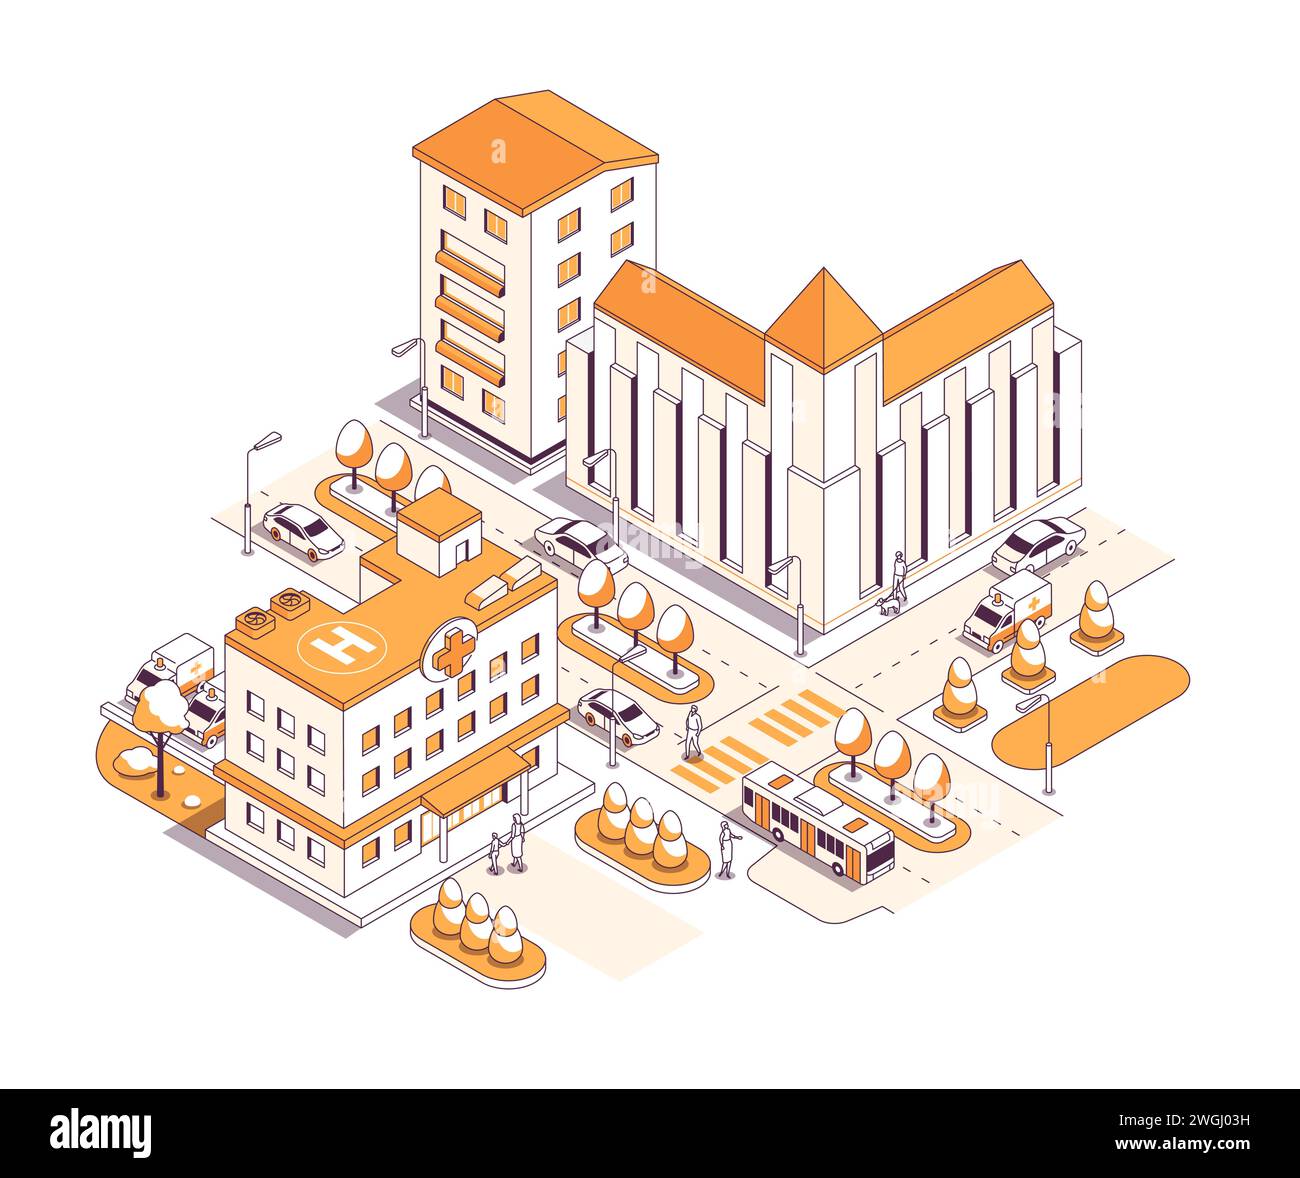 Public buildings on the street - vector isometric illustration Stock Vector